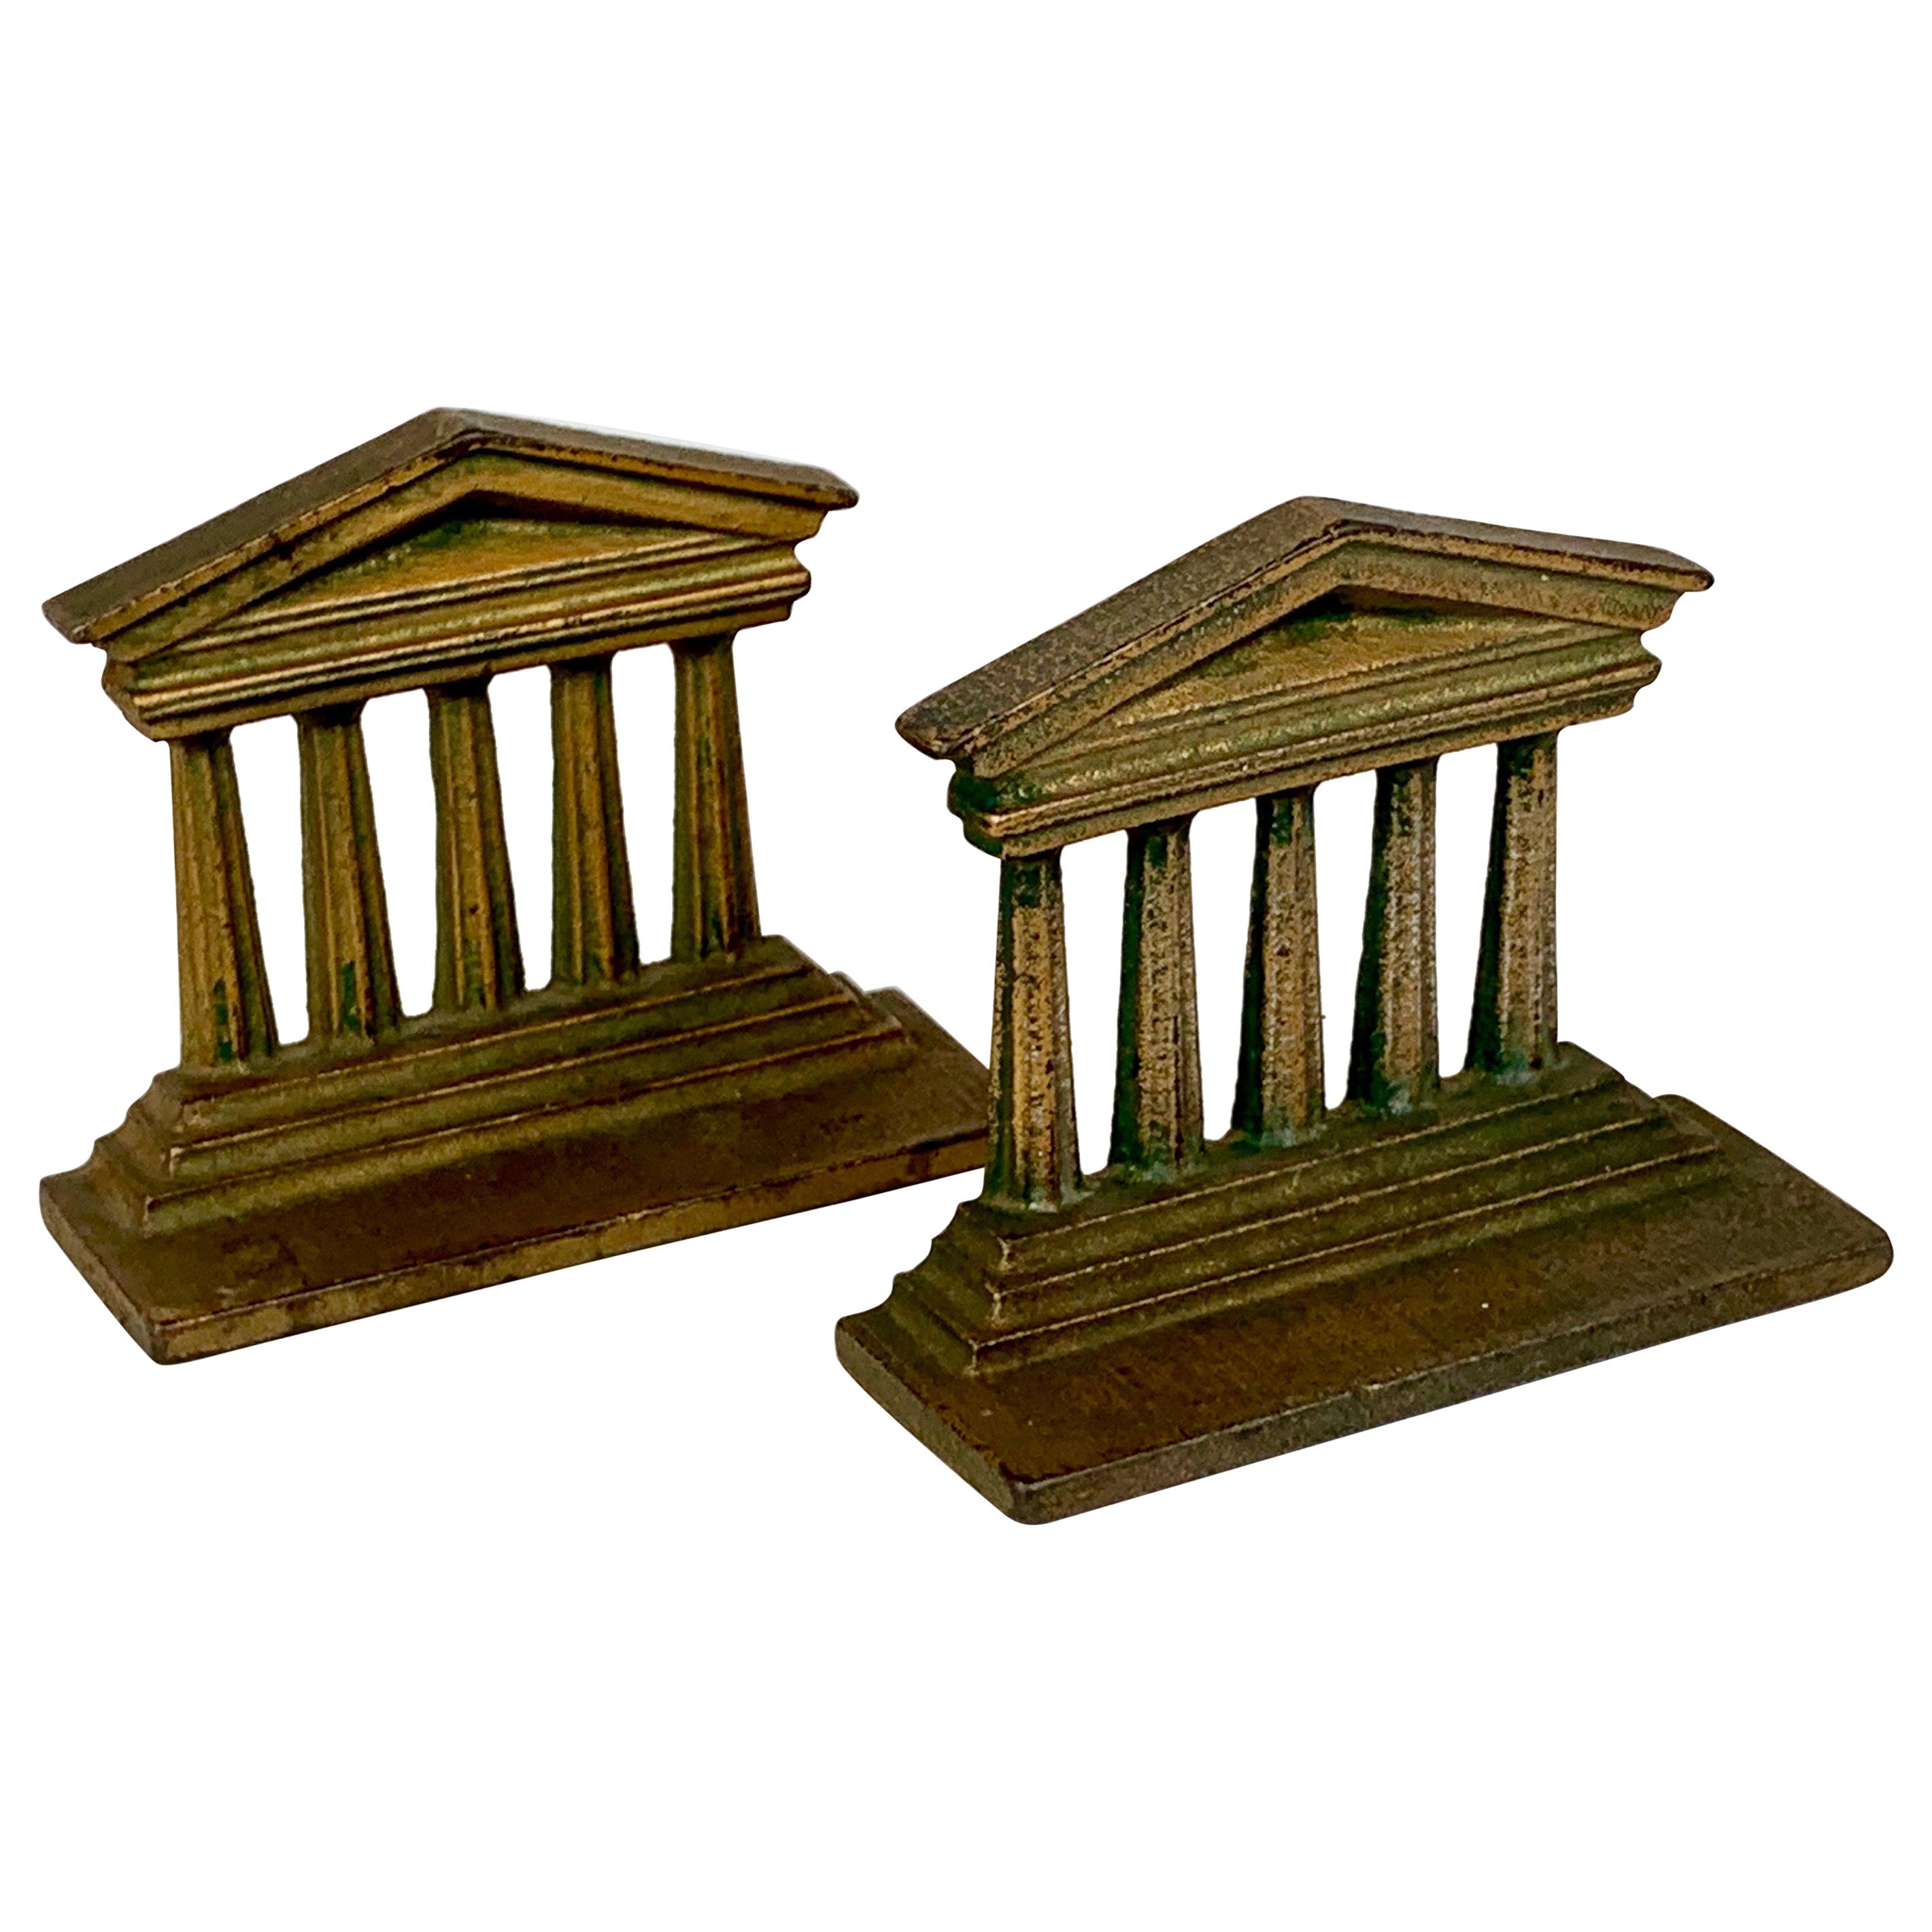 Temple of Isis Bookends by Bradley & Hubbard, American, c. 1900